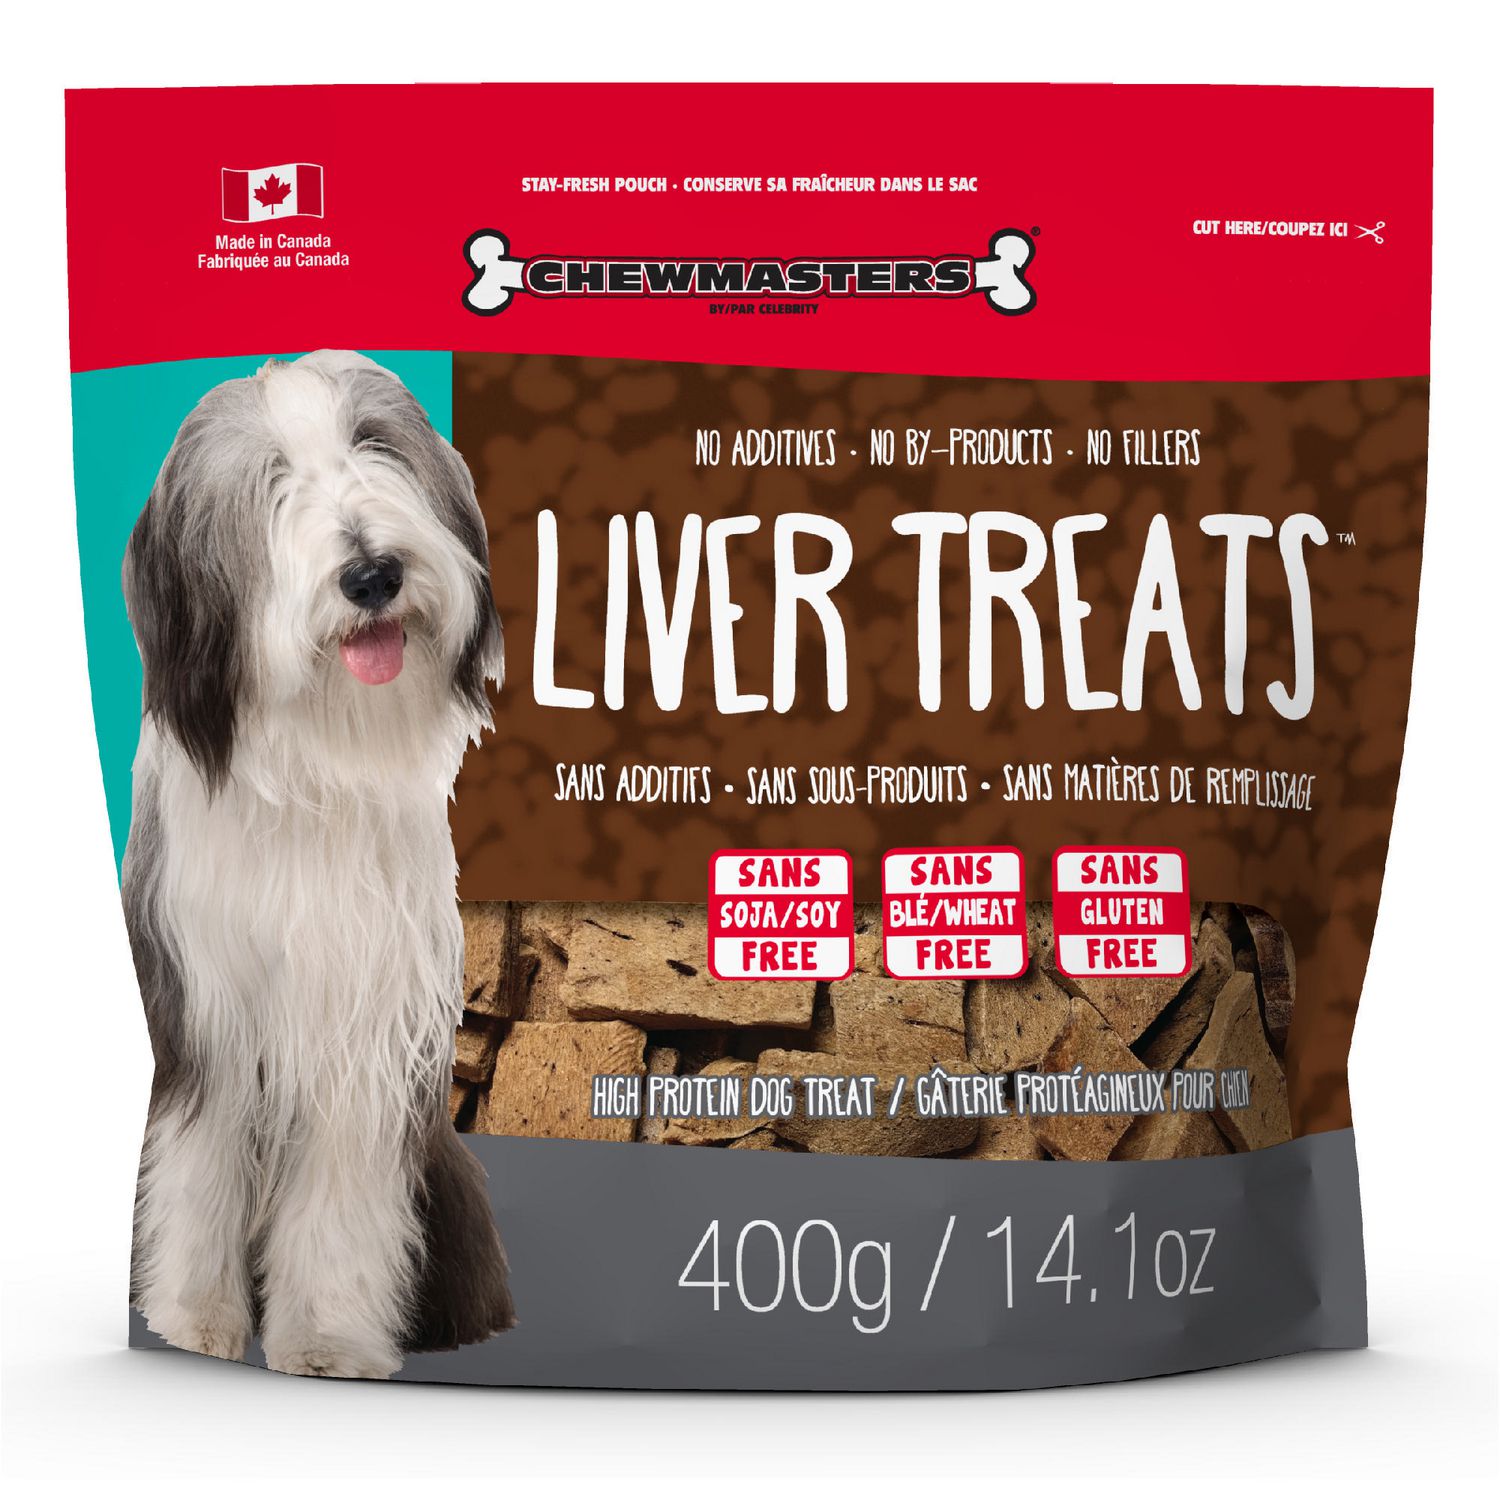 chewmasters freeze dried liver bites